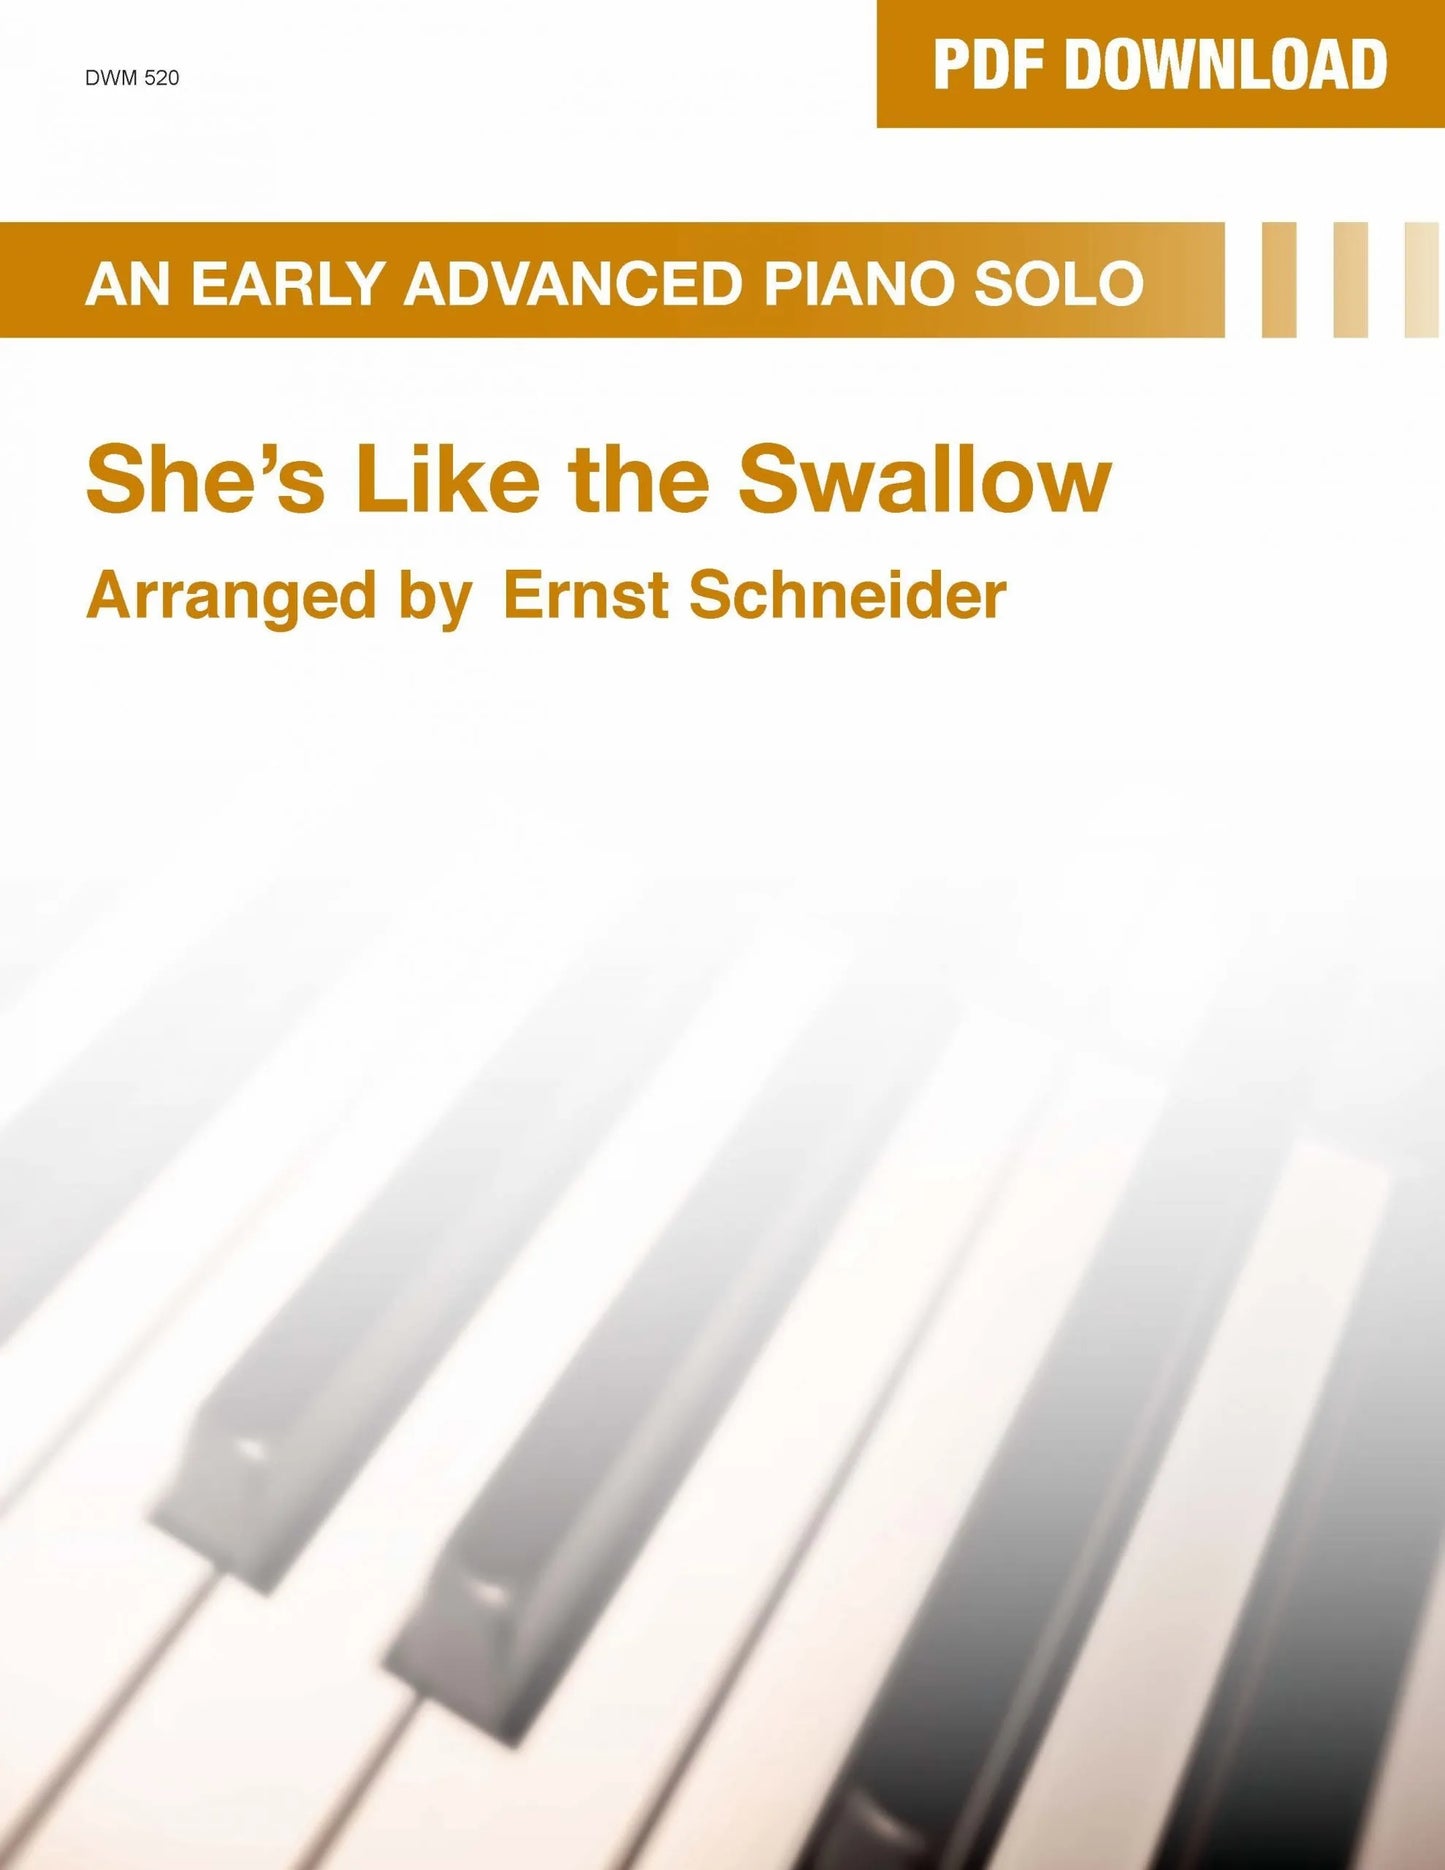 She’s Like the Swallow (PDF Download)